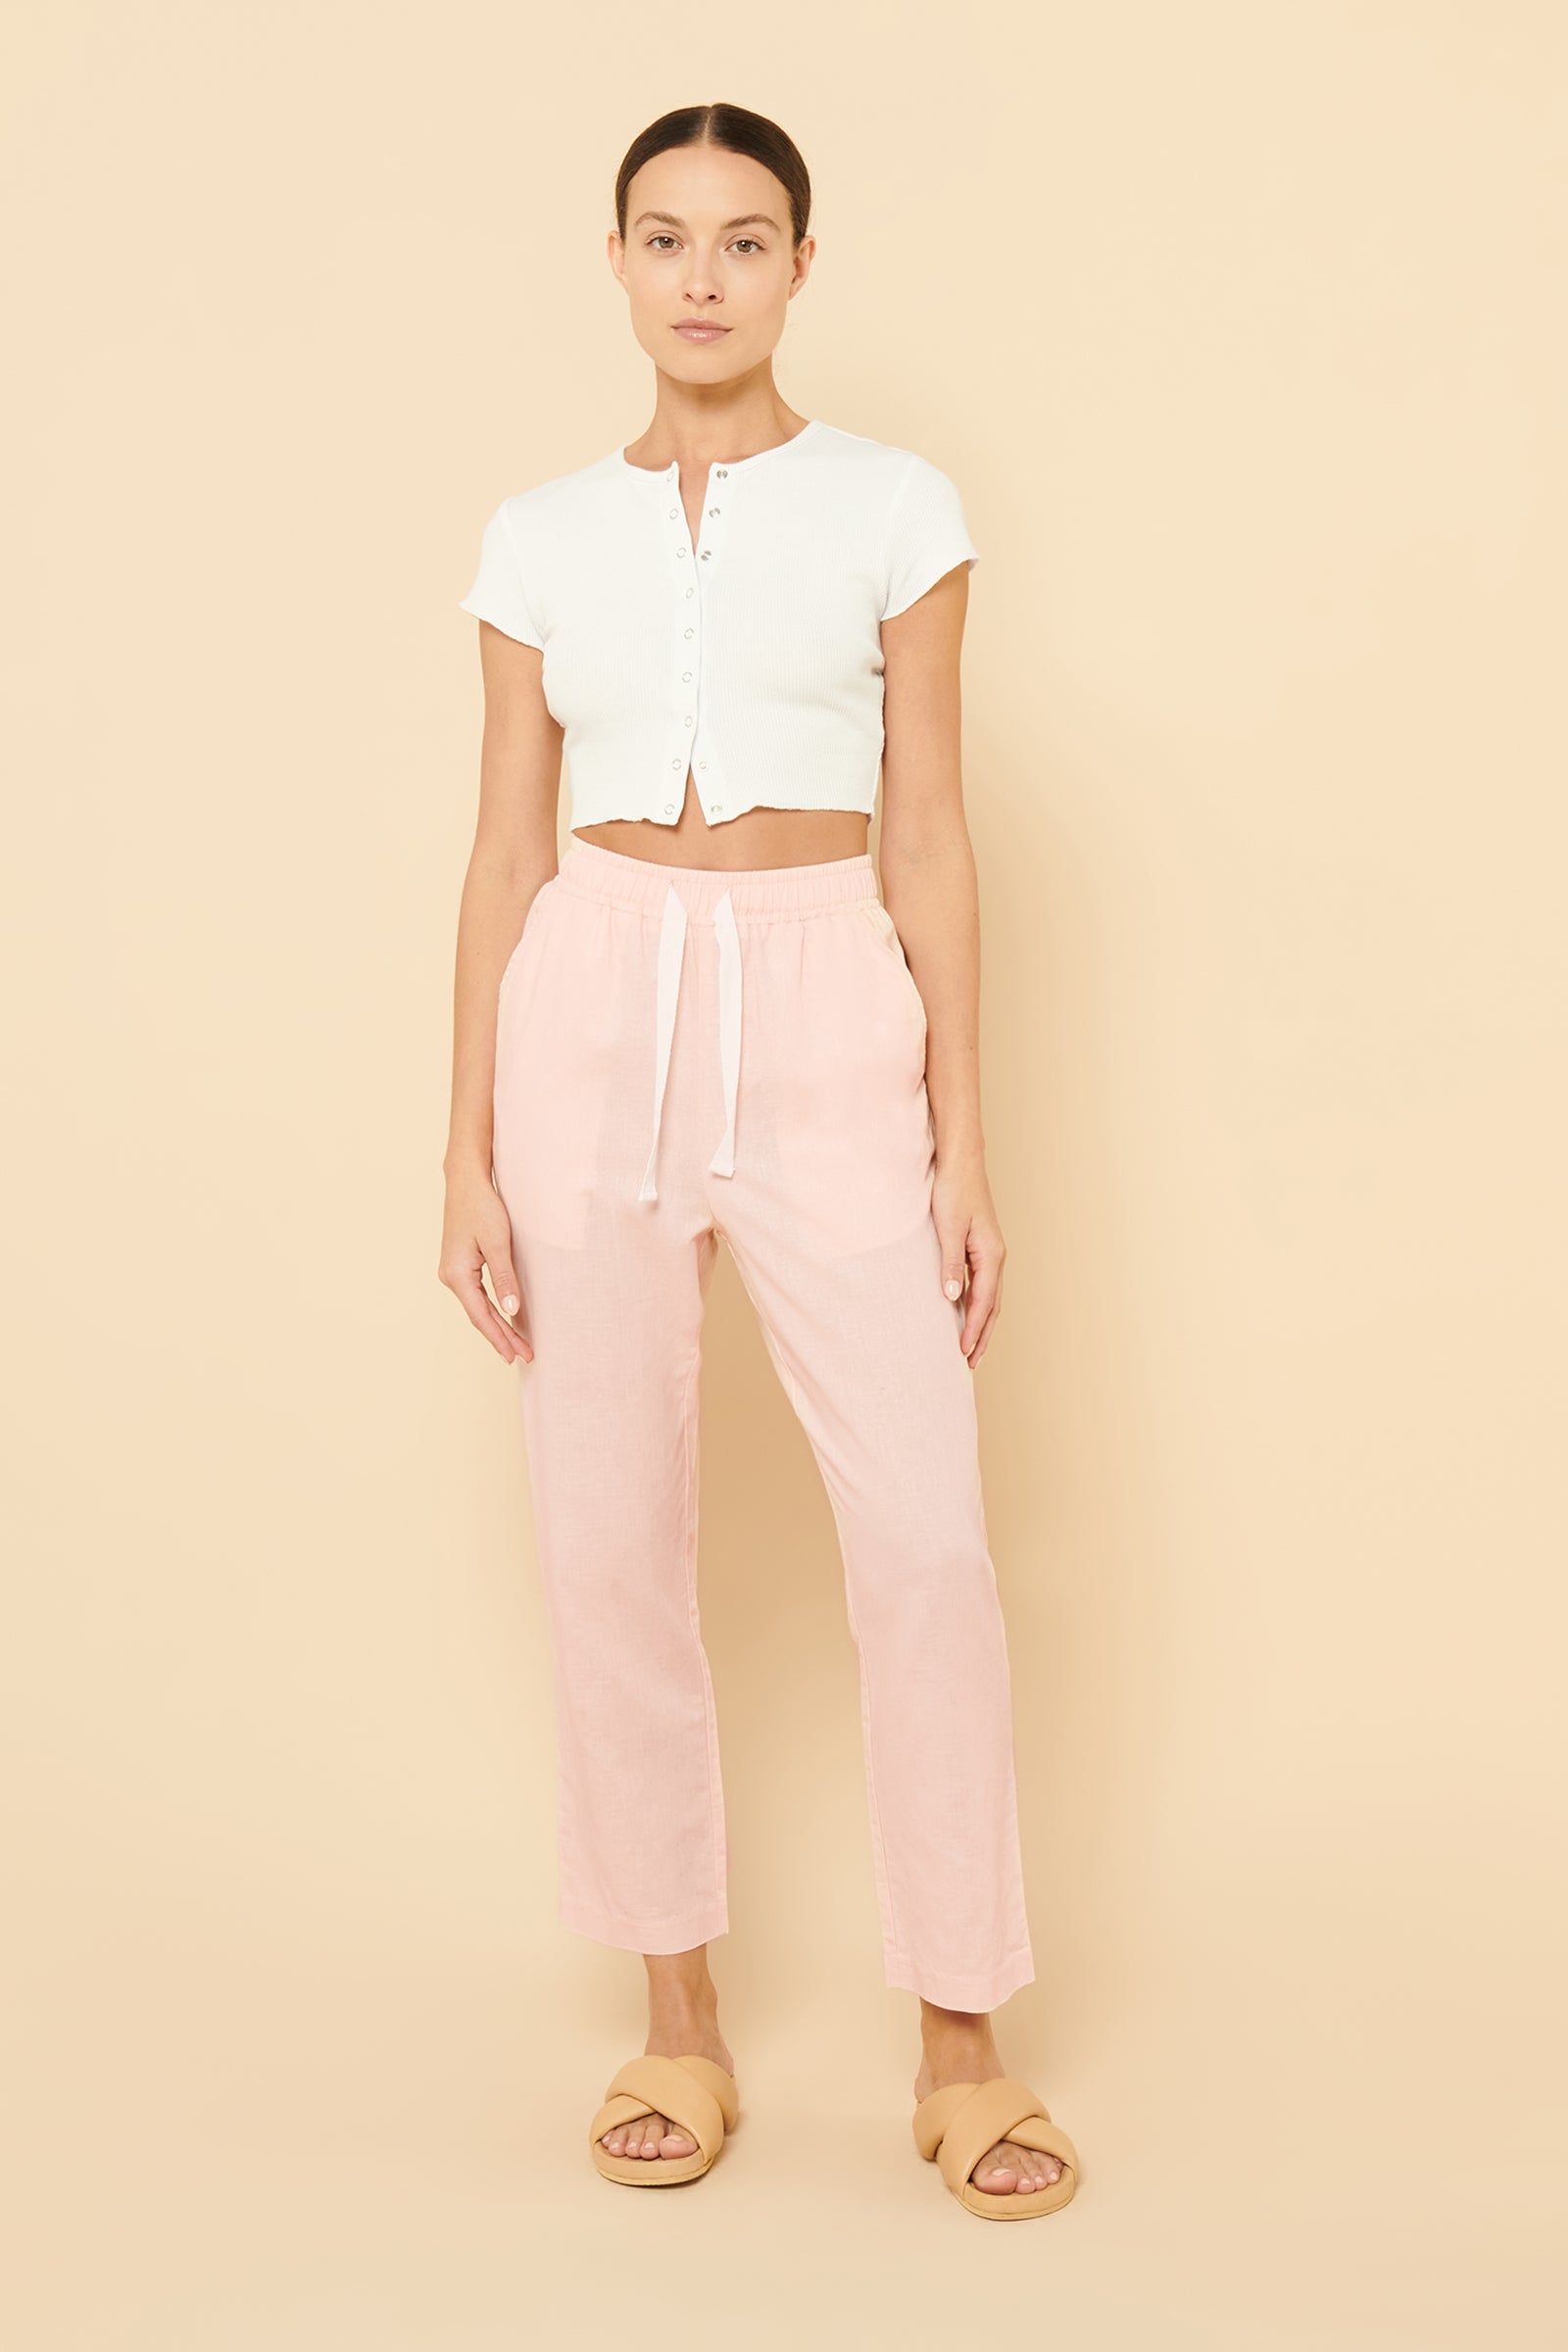 Nude Lucy Nude Classic Pant Mineral in Pink